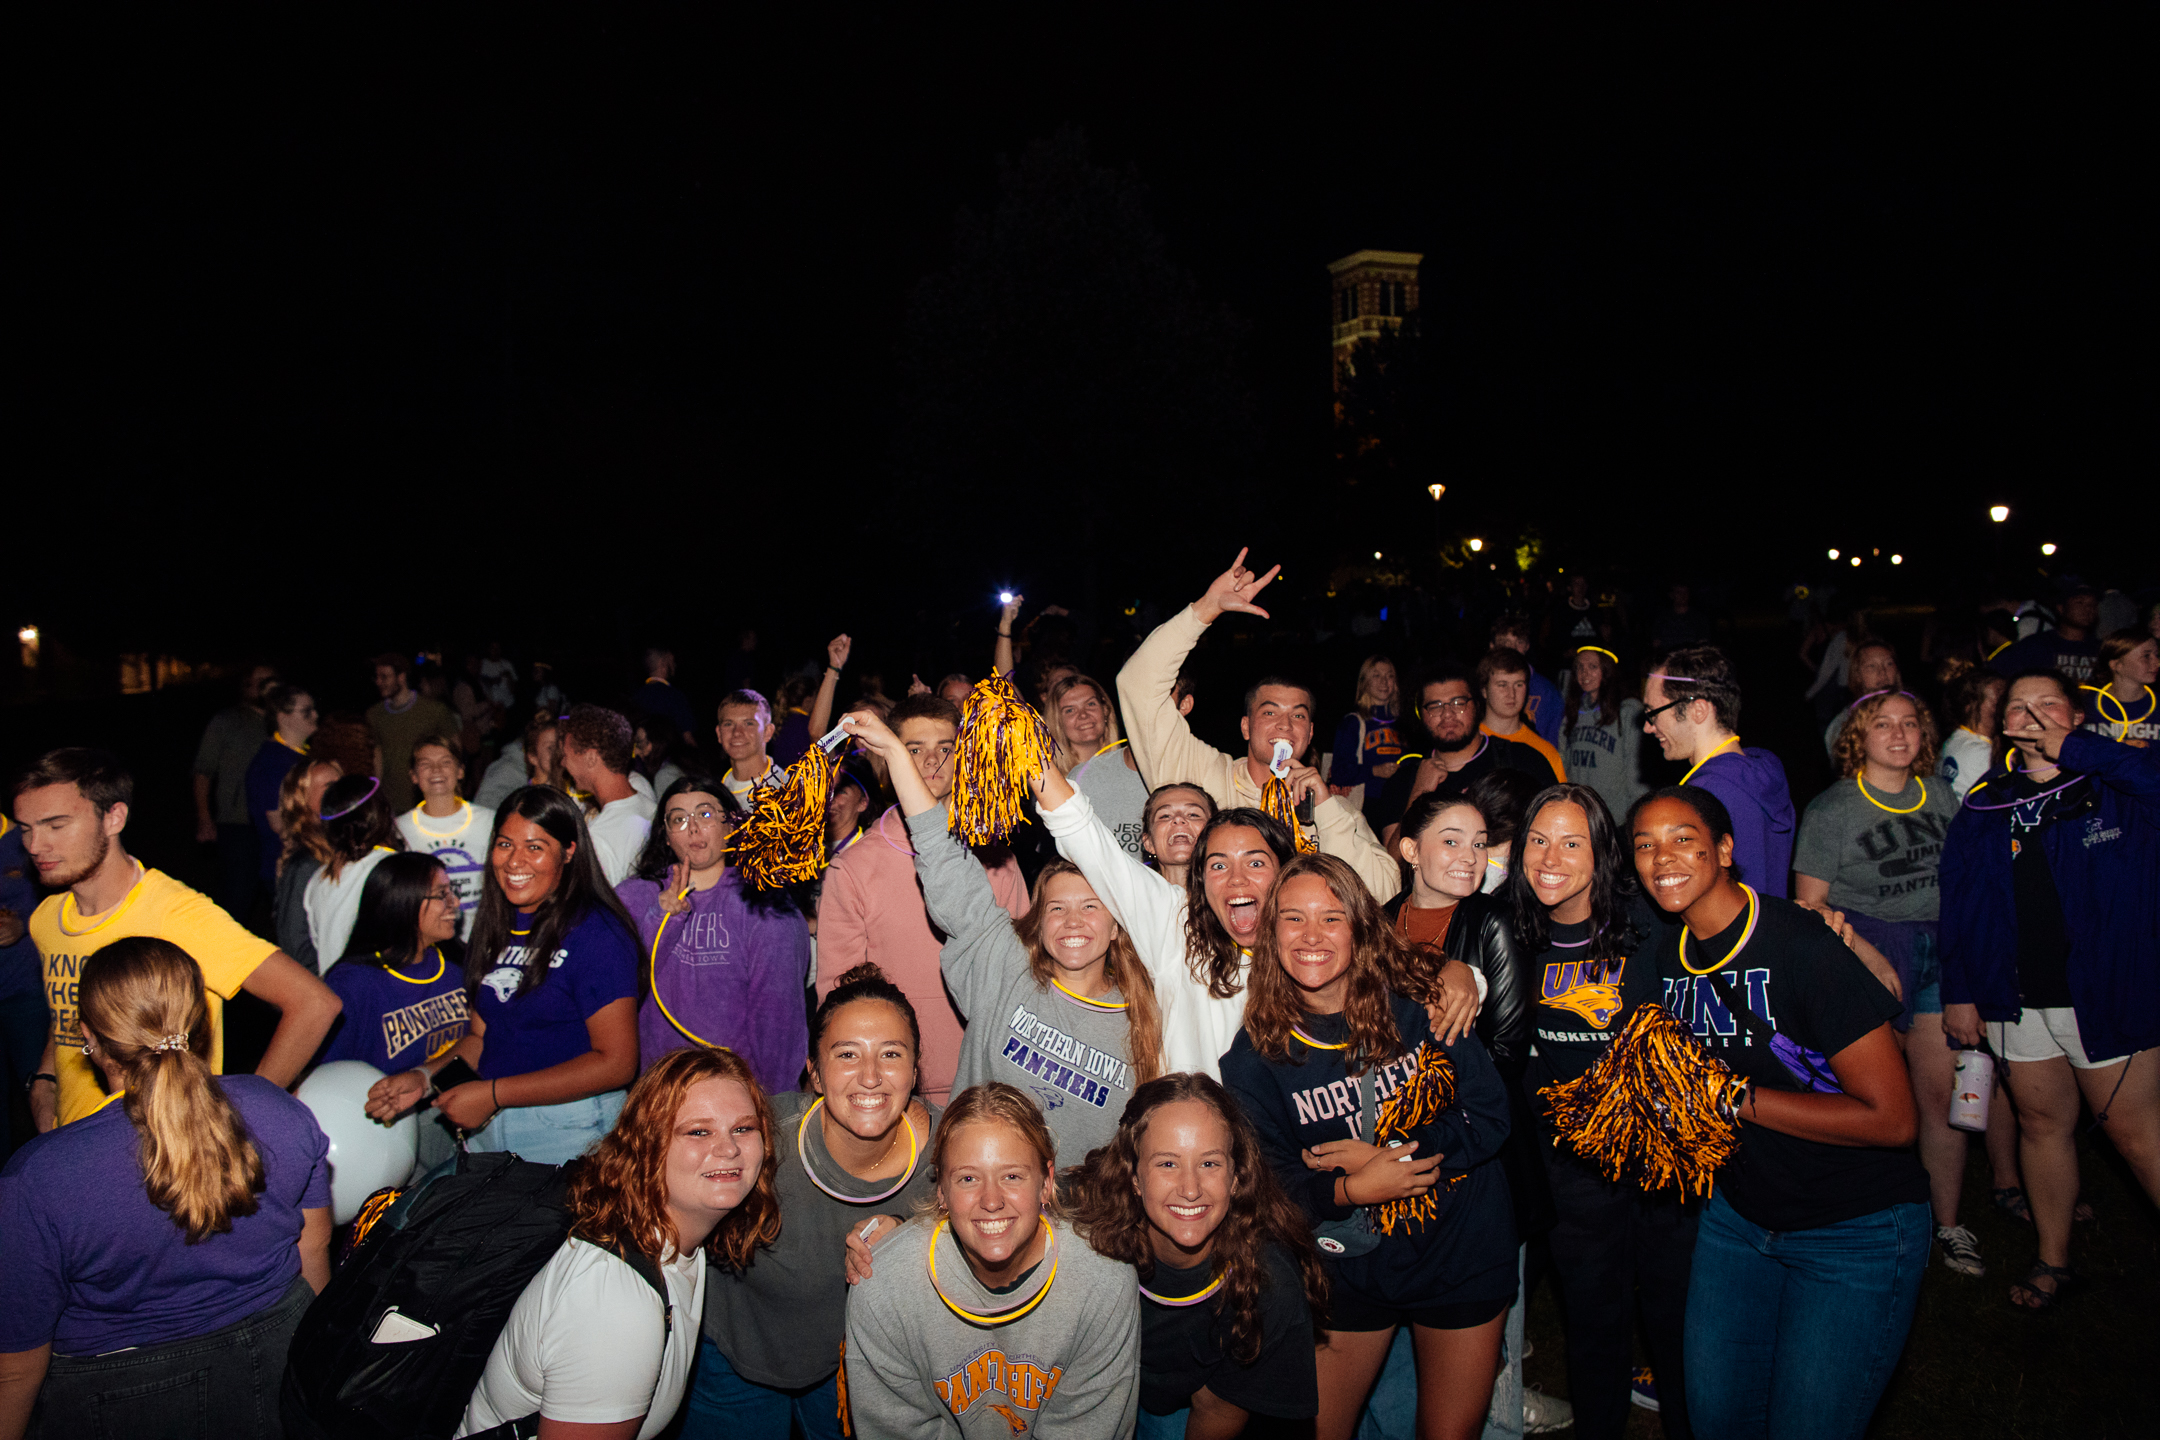 Exited and smiling students in the bottom half of image at night wearing UNI themed clothing and apparel. Dark black sky with the Campanile slightly lit in the background.